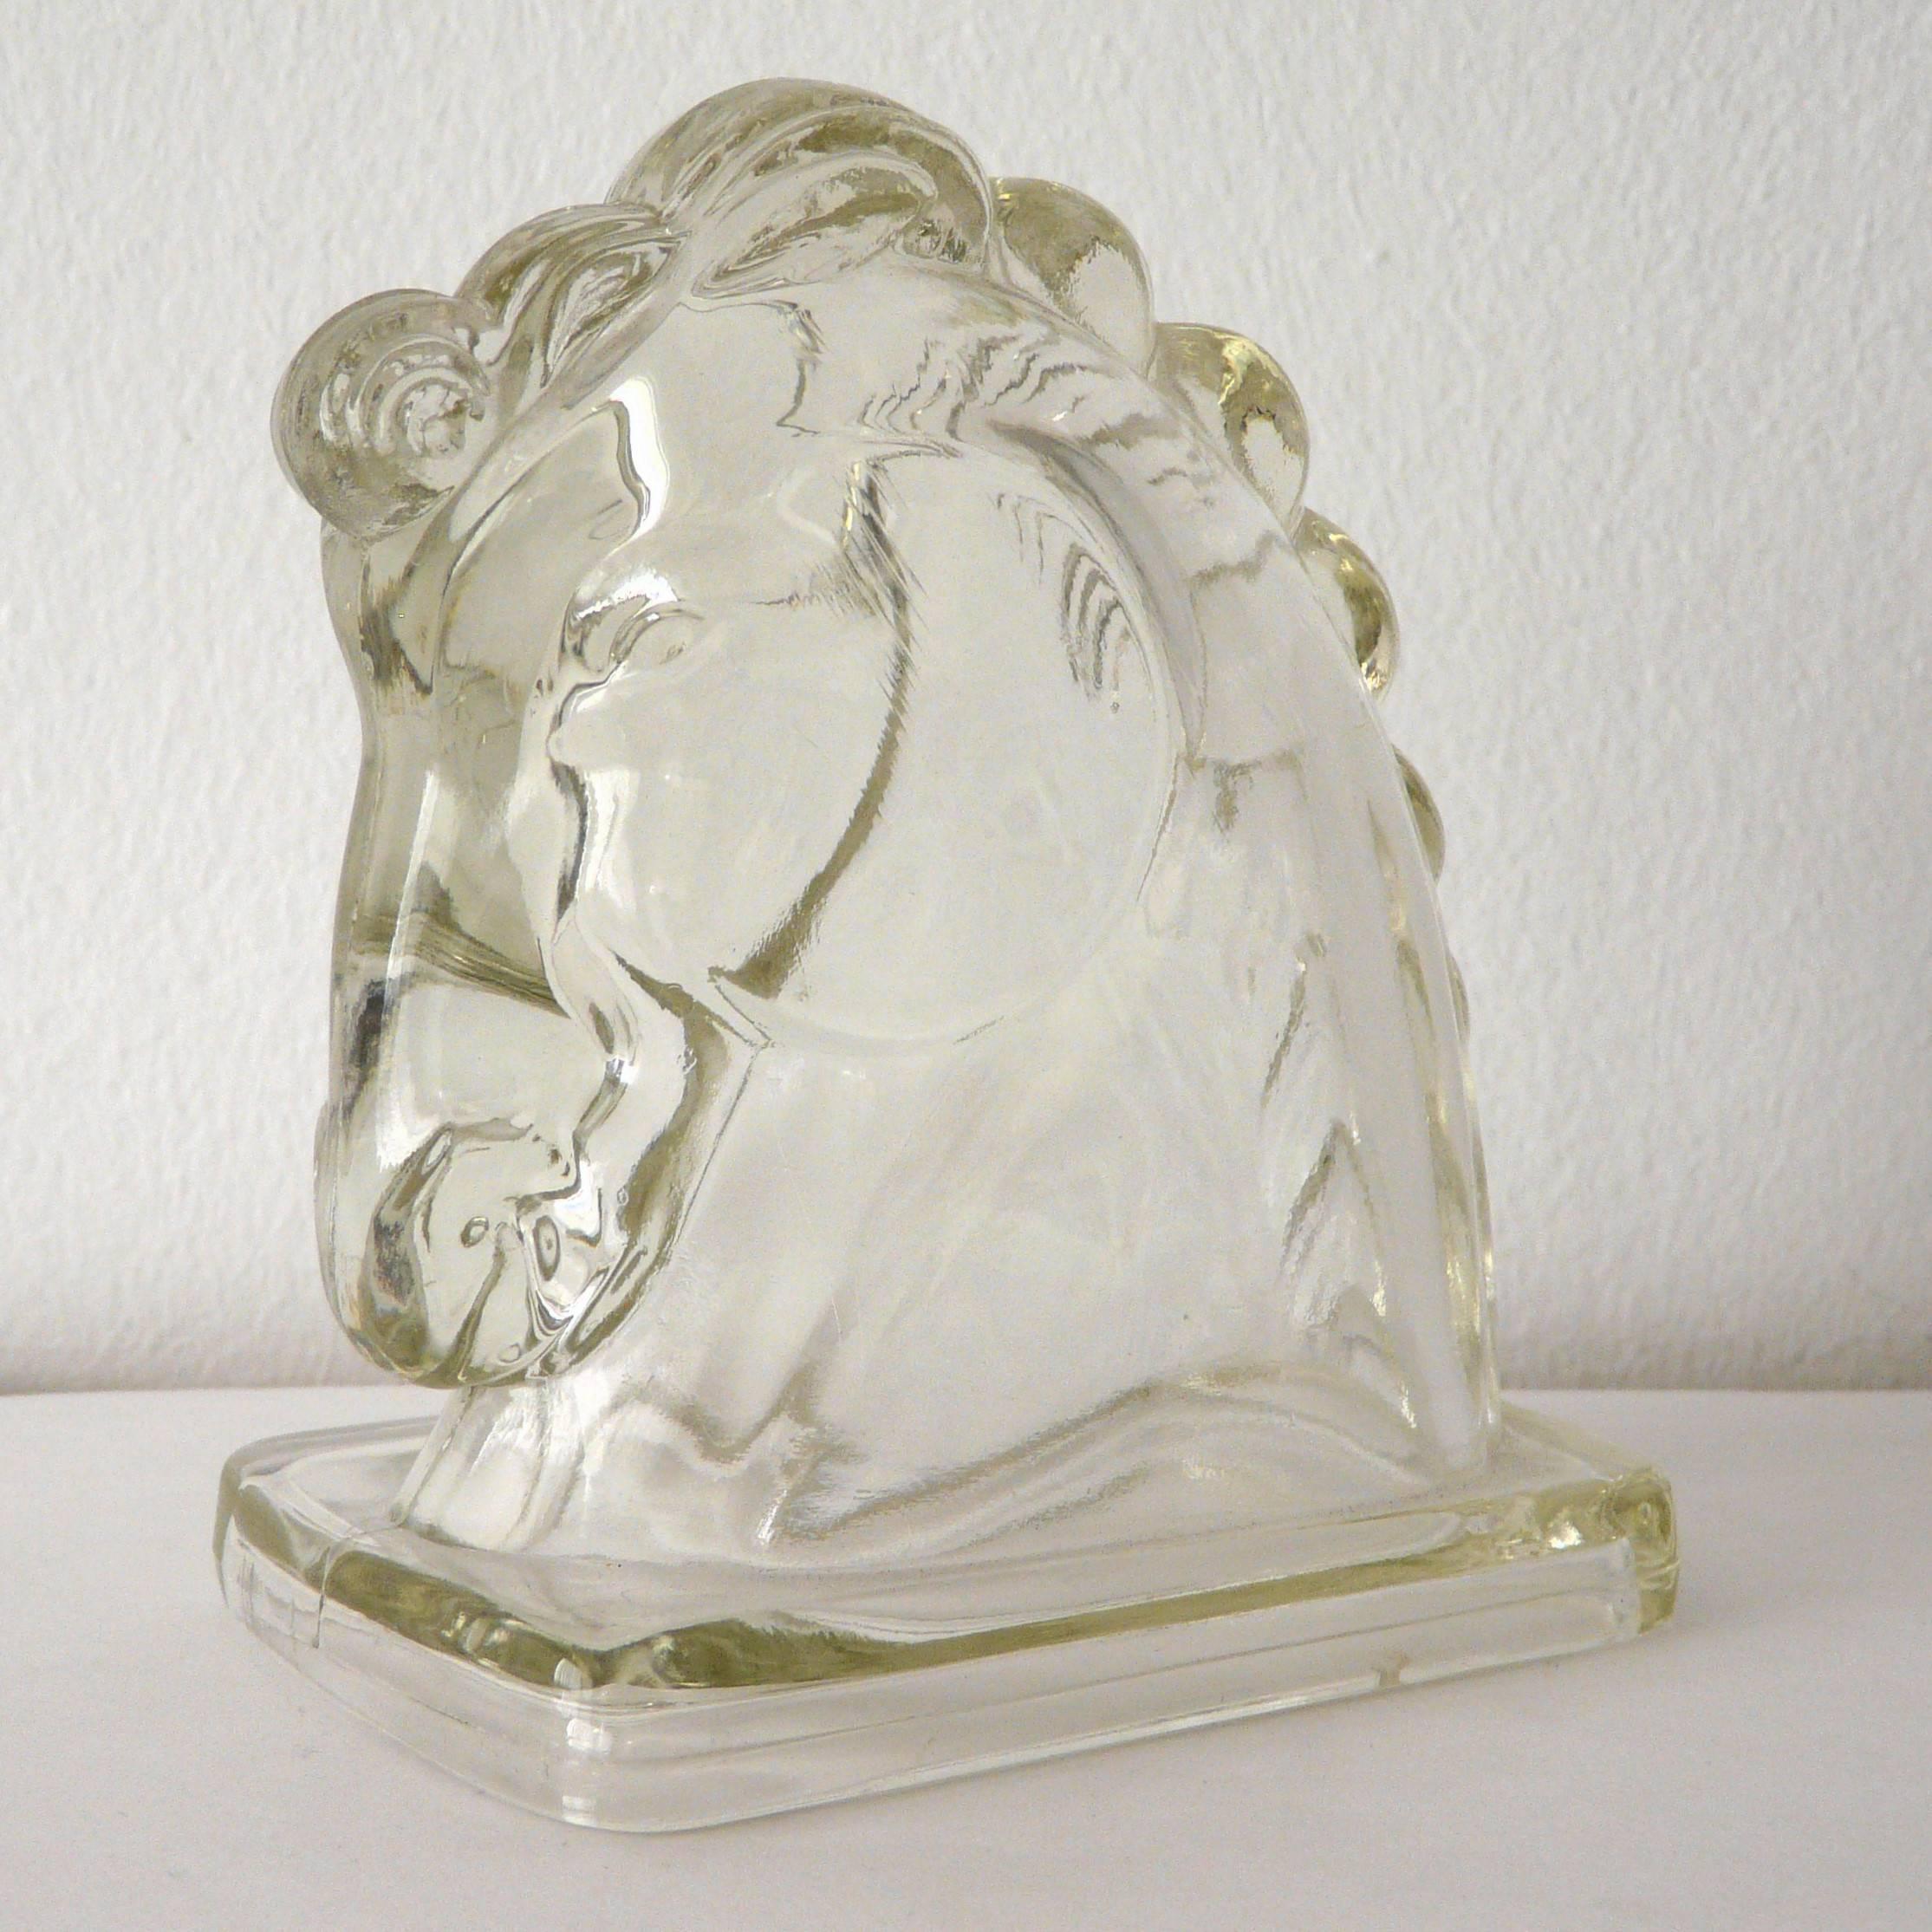 Original vintage set of three glass horse heads.
Made in the United States of America in the 1960s.
Depth: 3 inches / Width: 4.5 inches / Height: 5.5 inches
One set in stock in Palm Springs
Can only be purchase as a set.
Order Reference #: G14
This